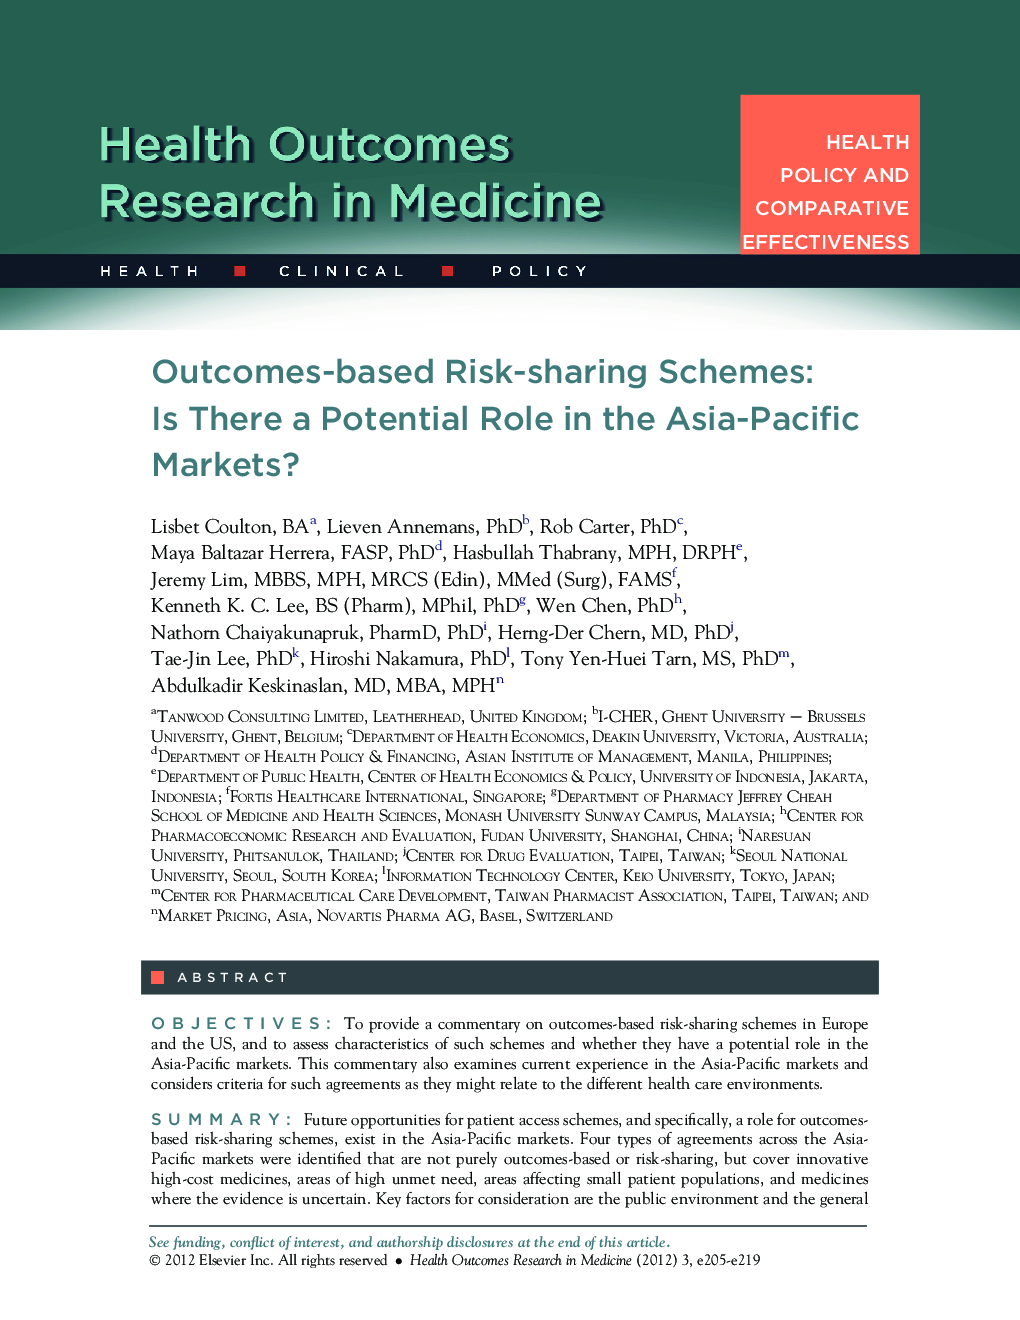 Outcomes-based Risk-sharing Schemes: Is There a Potential Role in the Asia-Pacific Markets? 